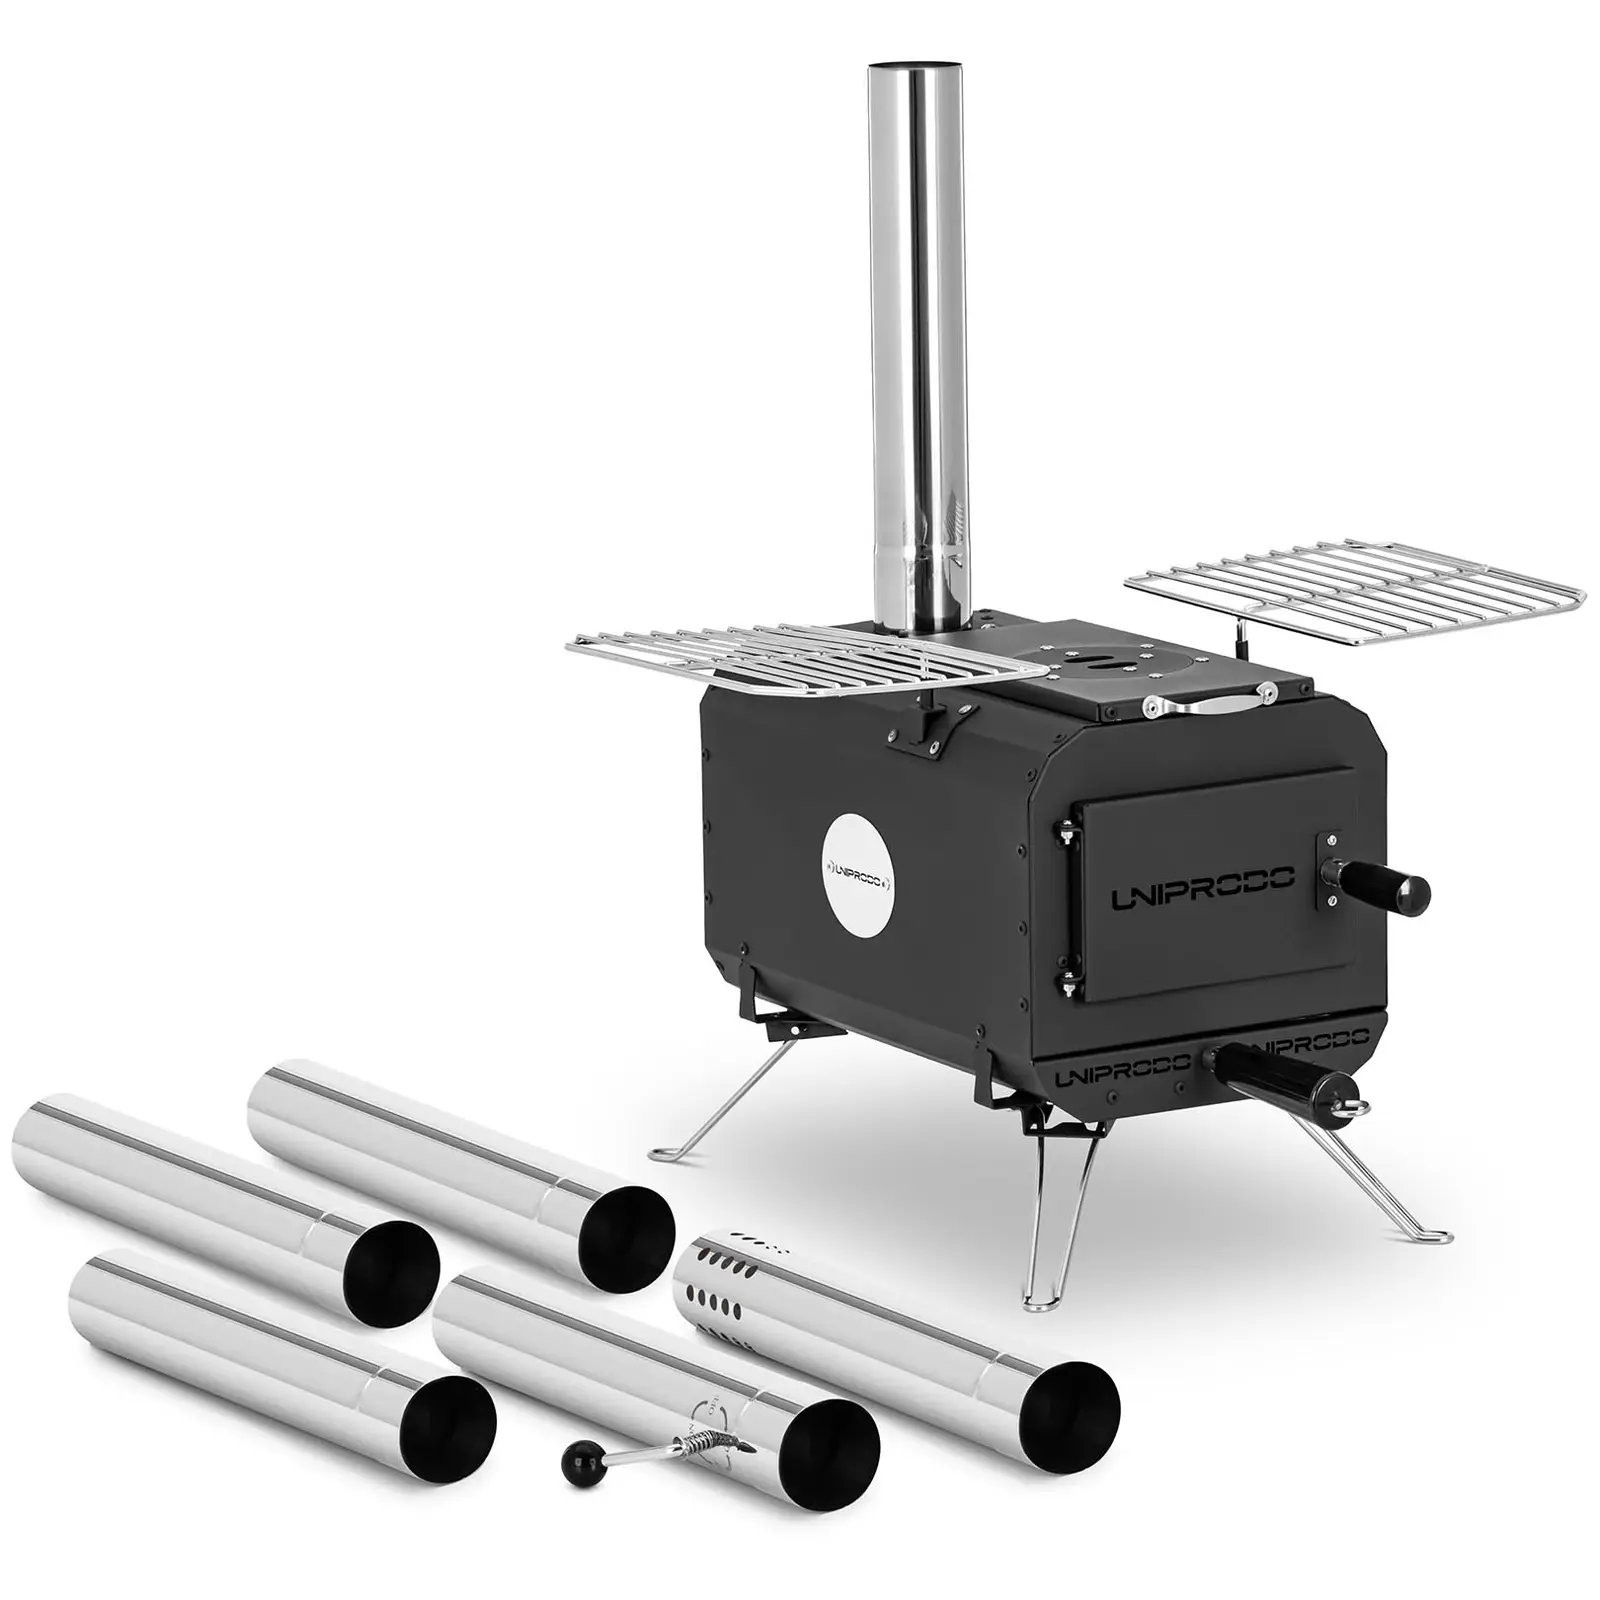 Camping Stove - black - foldable - 382 x 250 x 231 mm - carbon steel